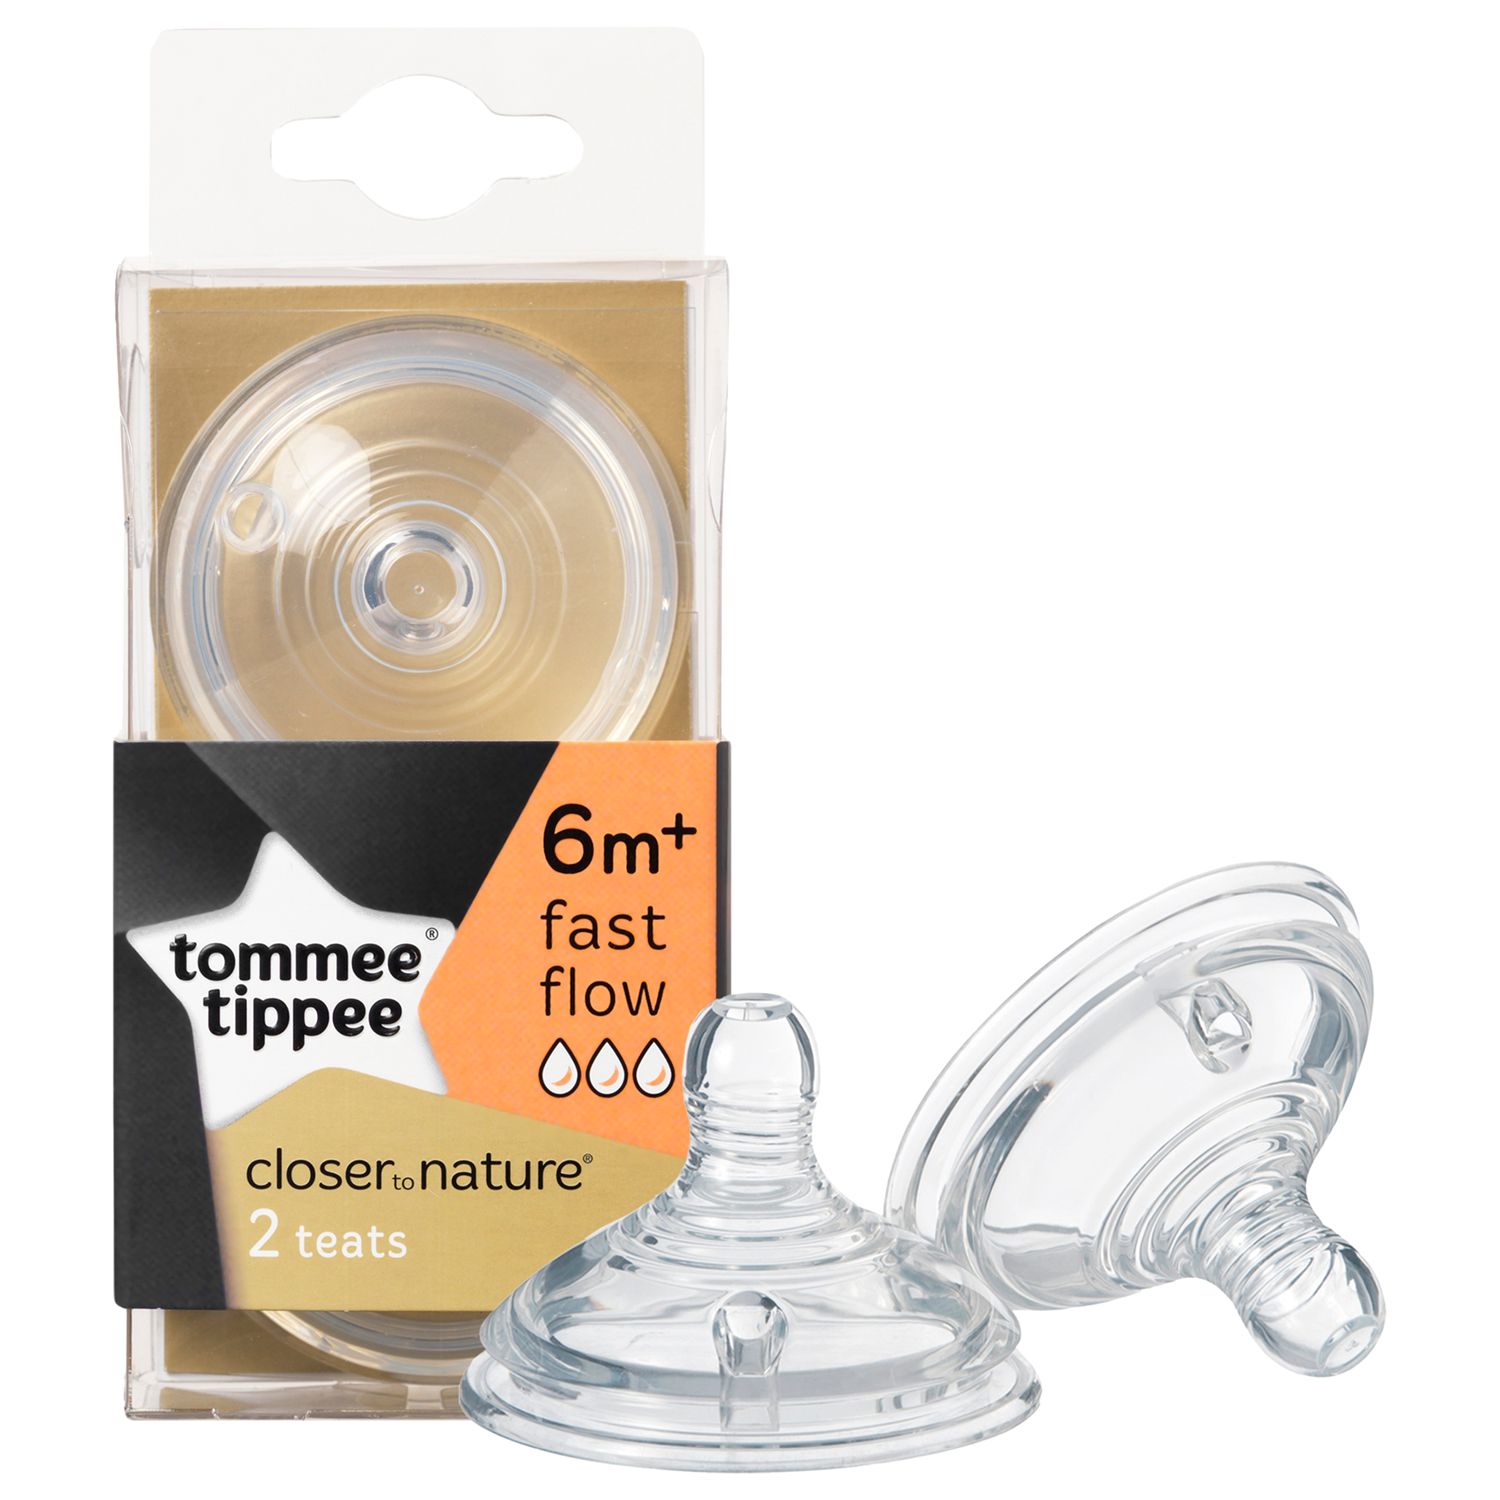 tommee tippee teats for 8 month old